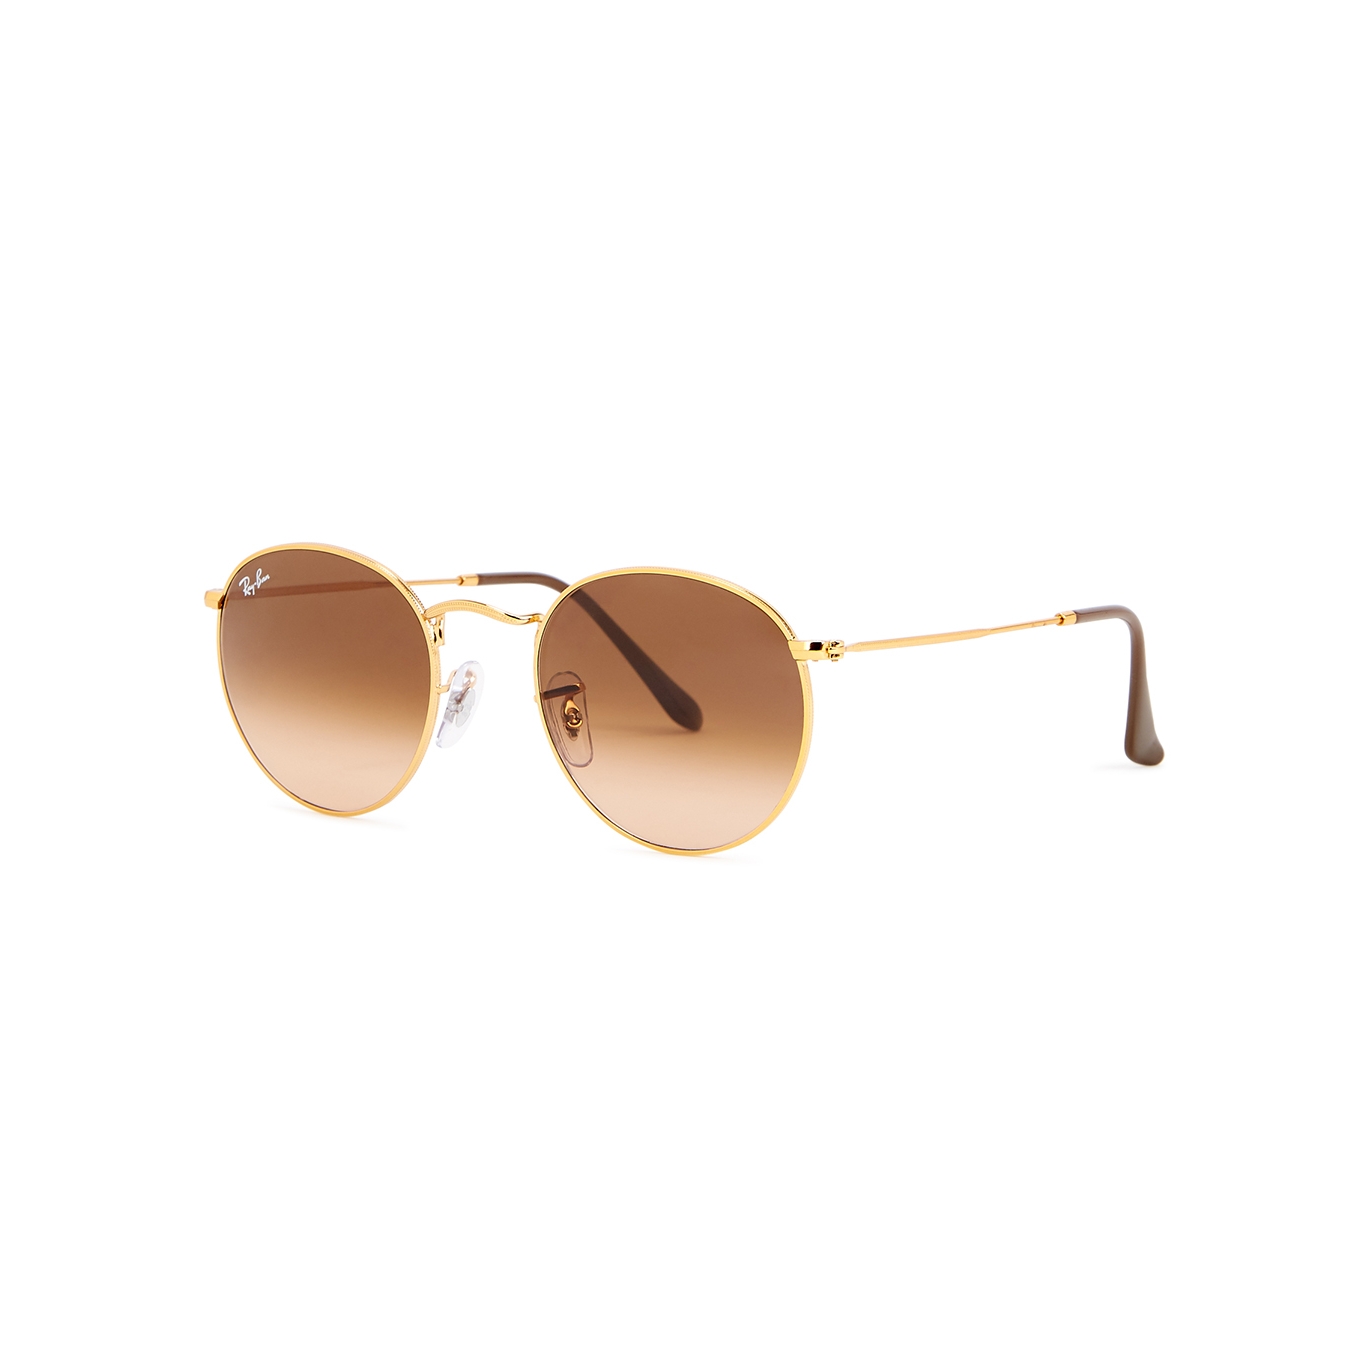 Ray-ban Copper Round-frame Sunglasses - Gold